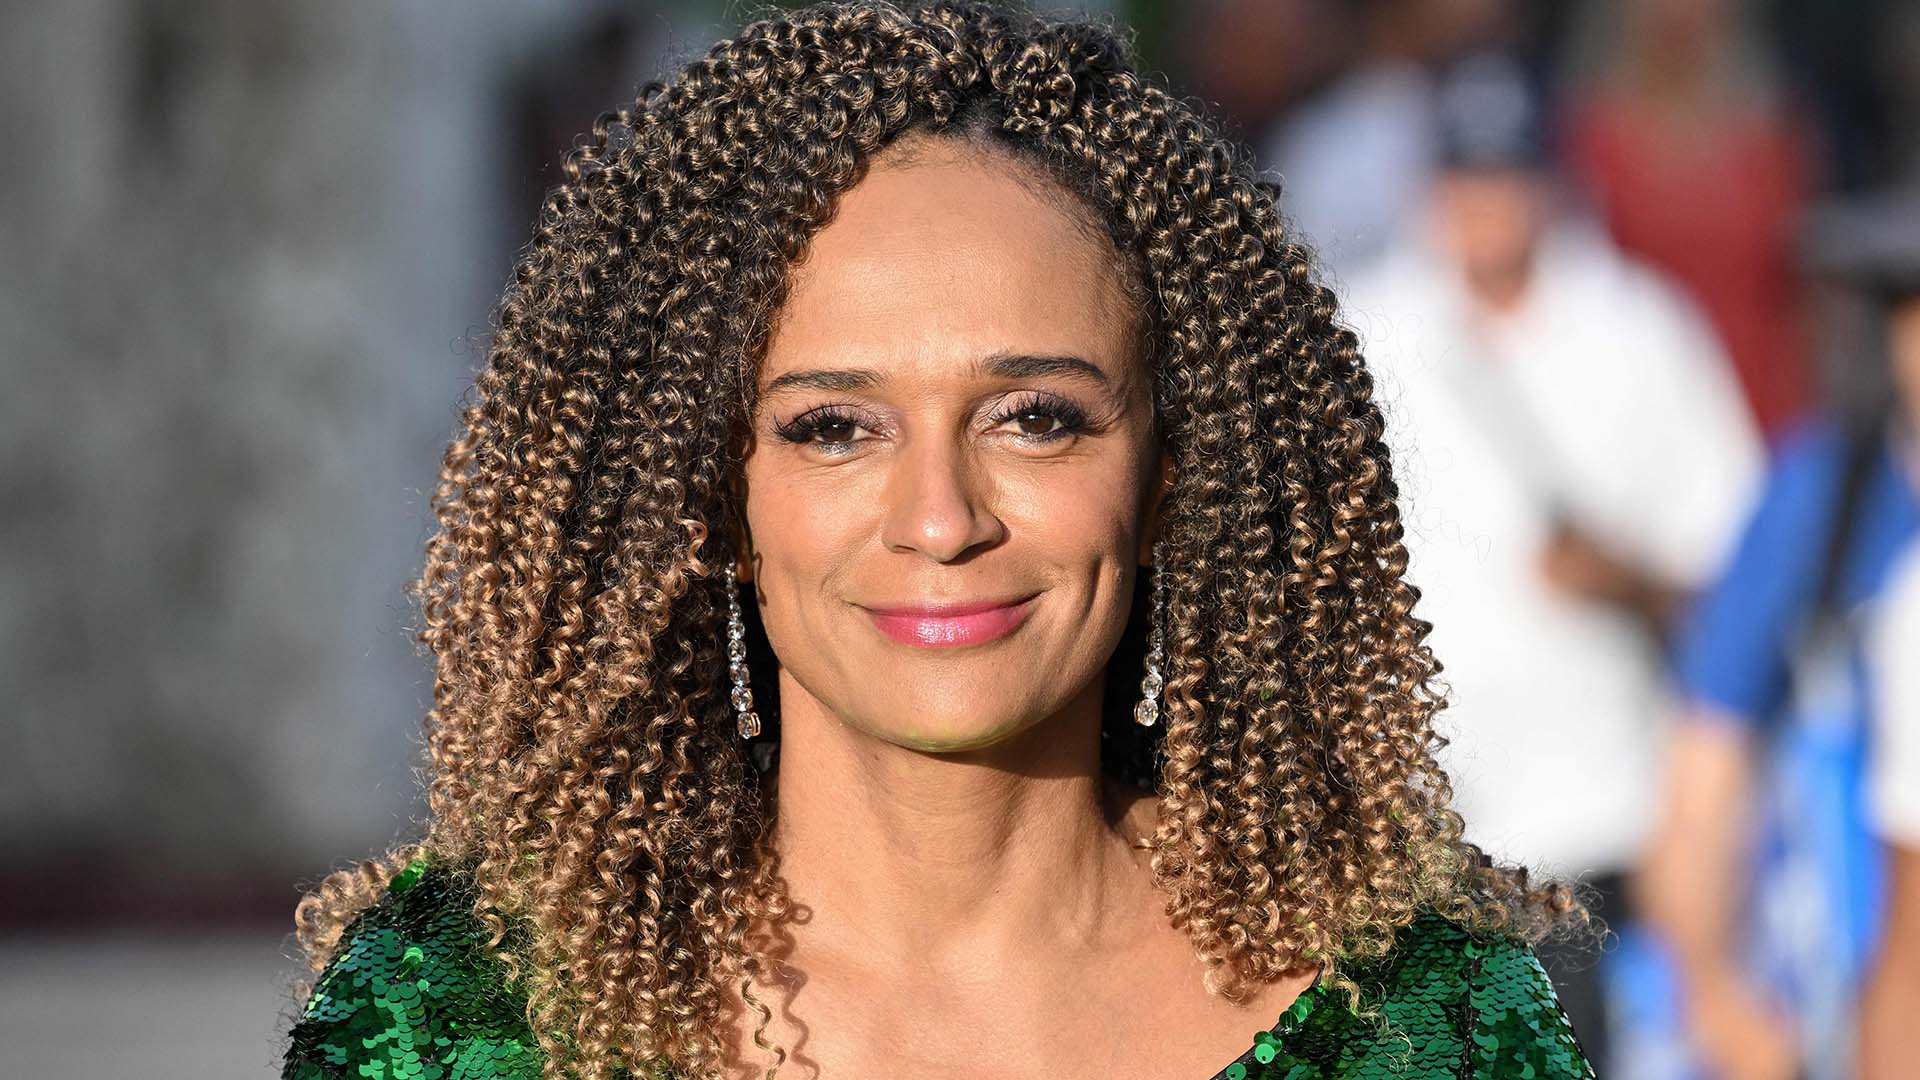 A woman with curly hair and a sequined green dress smiling